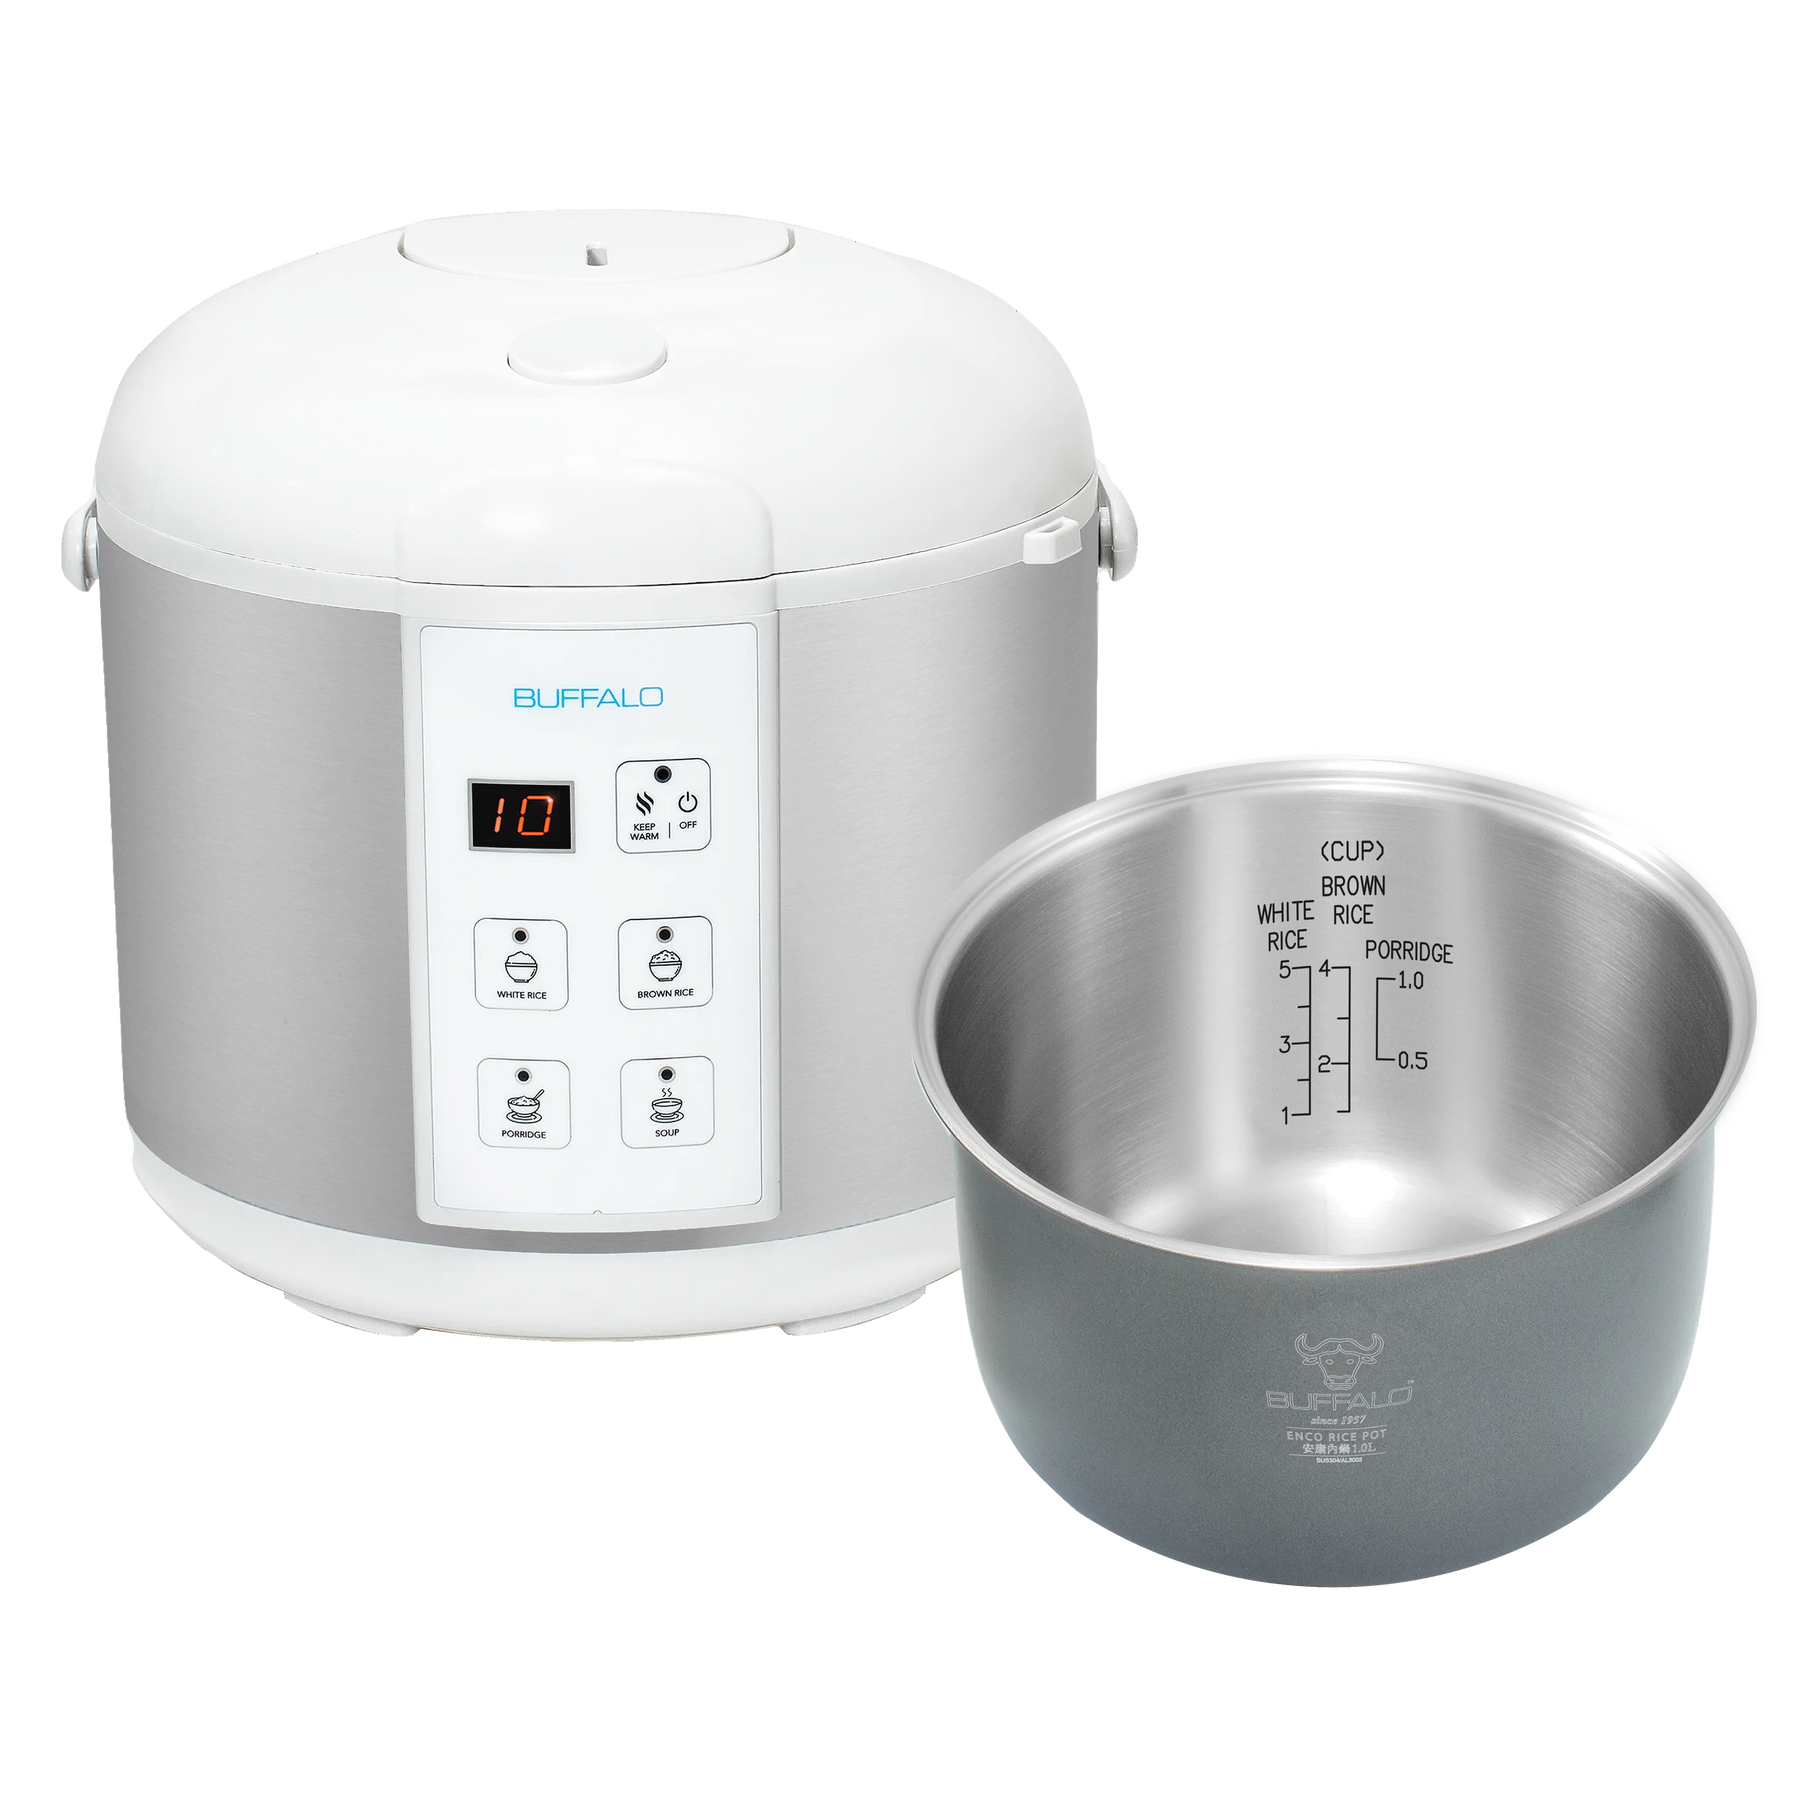 Buffalo compact electric rice cooker 4.2 liters